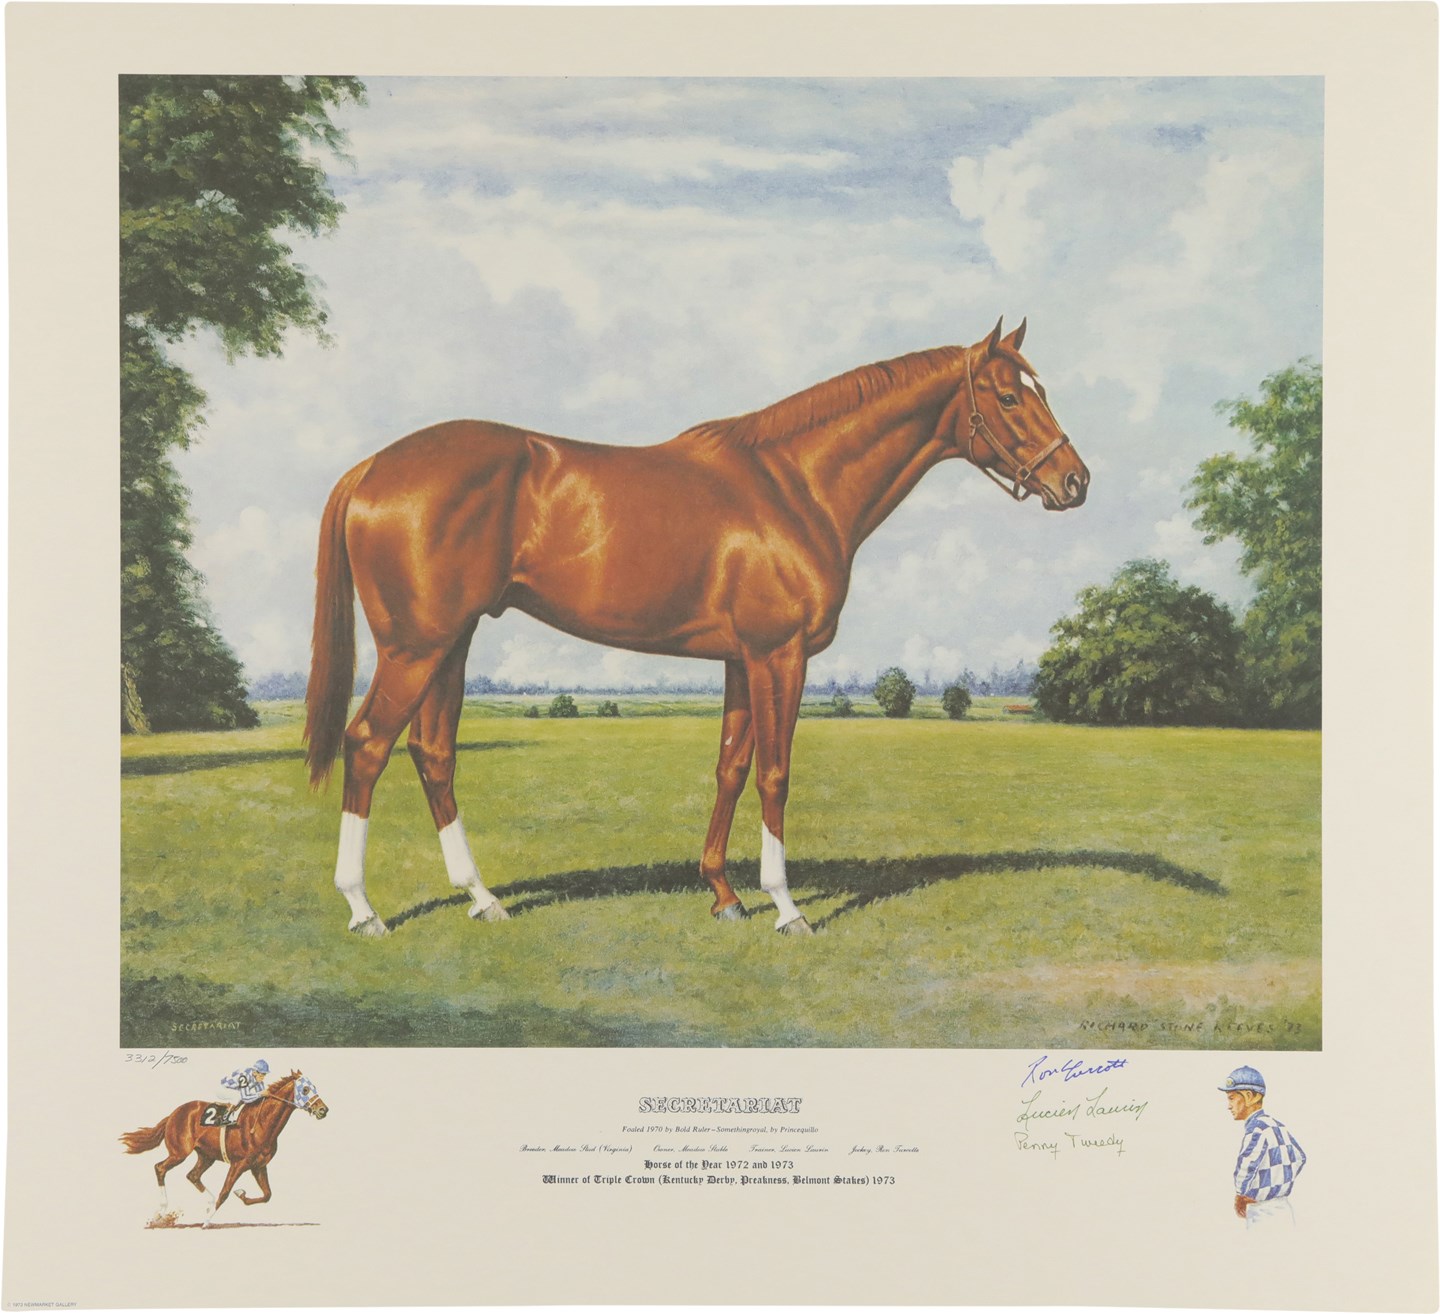 - Secretariat Limited-Edition Lithograph by Richard Stone Reeves Signed by the Owner, Jockey and Trainer